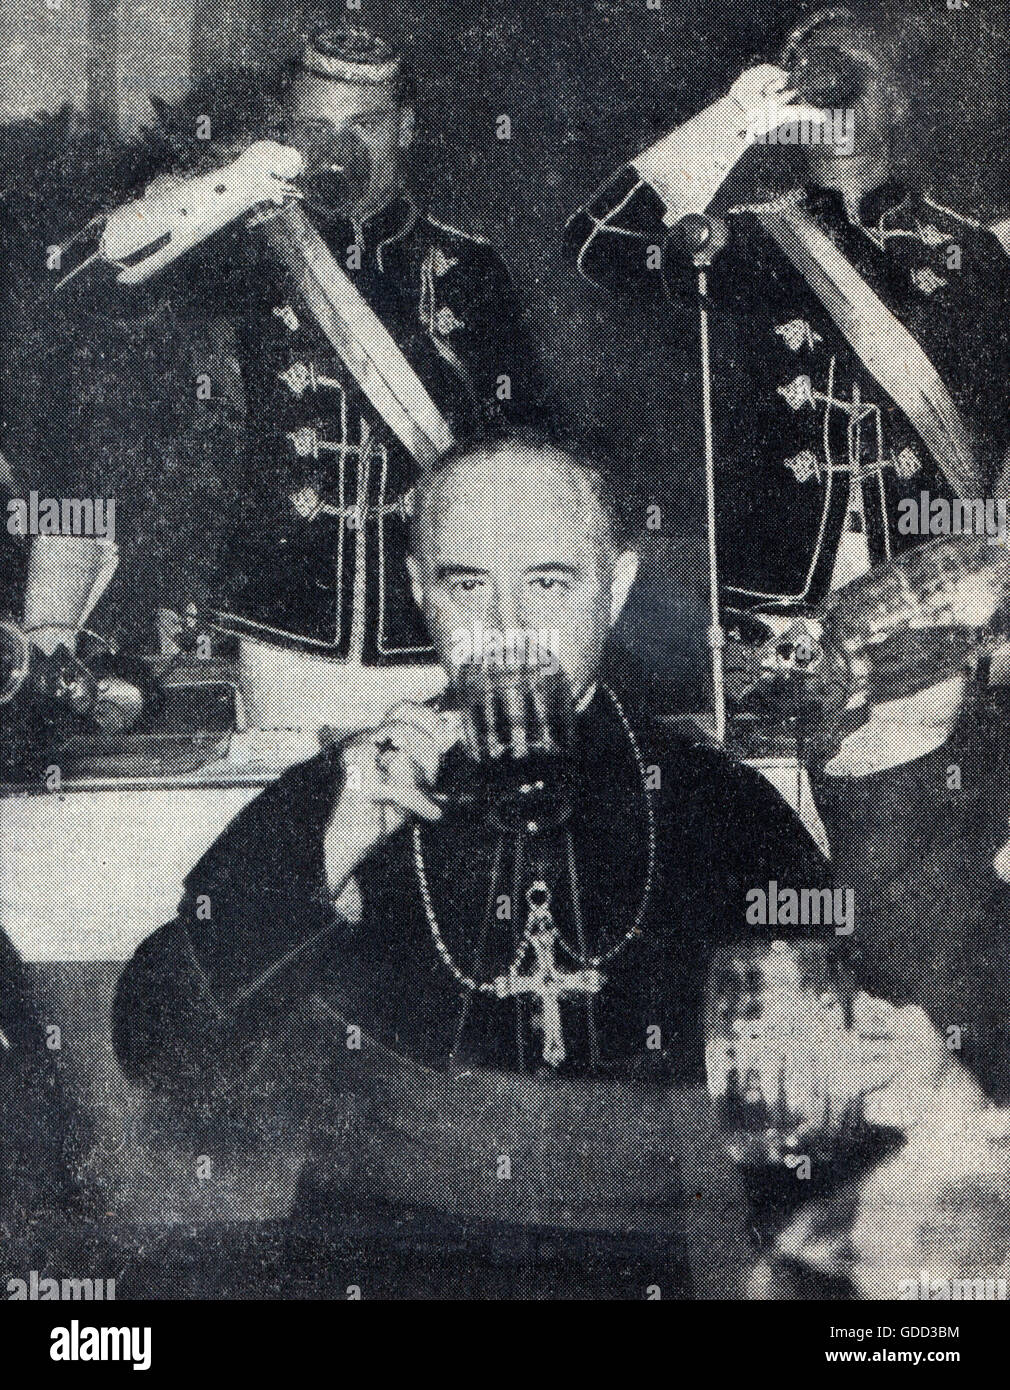 Wendel, Joseph Cardinal, 27.5.1901 - 31.12.1960, German clergyman, half length, as guest of honour at the commercium during the 3rd German students' assembly, Munich, 8.5.1954, Stock Photo